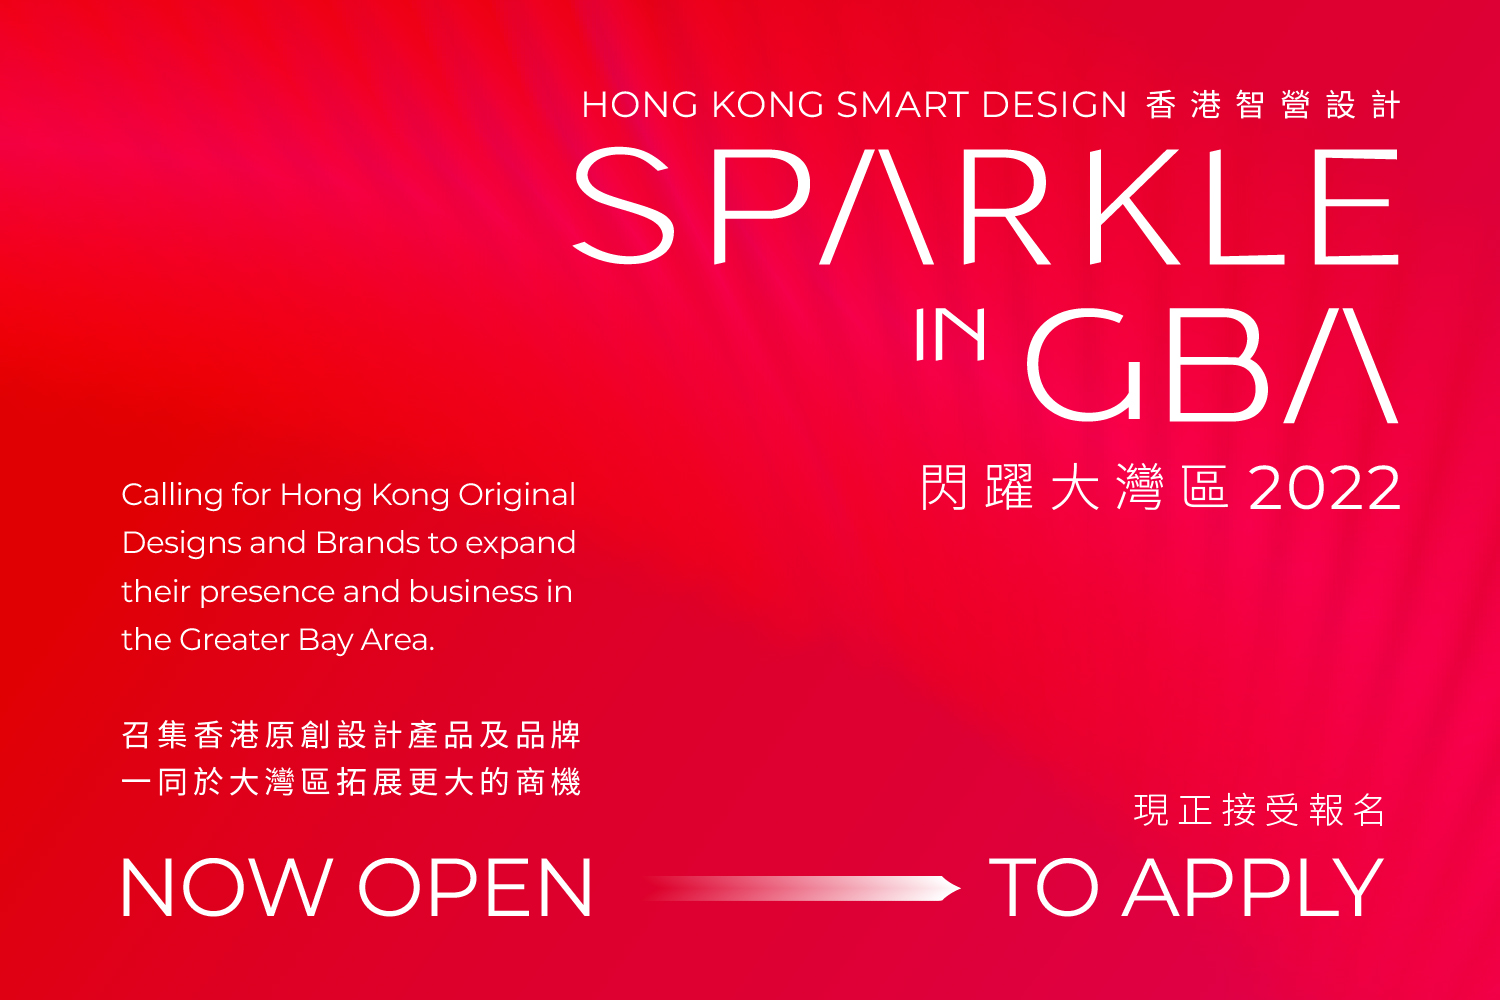 Supporting Event - Hong Kong Smart Design, Sparkle in Greater Bay Area 2022